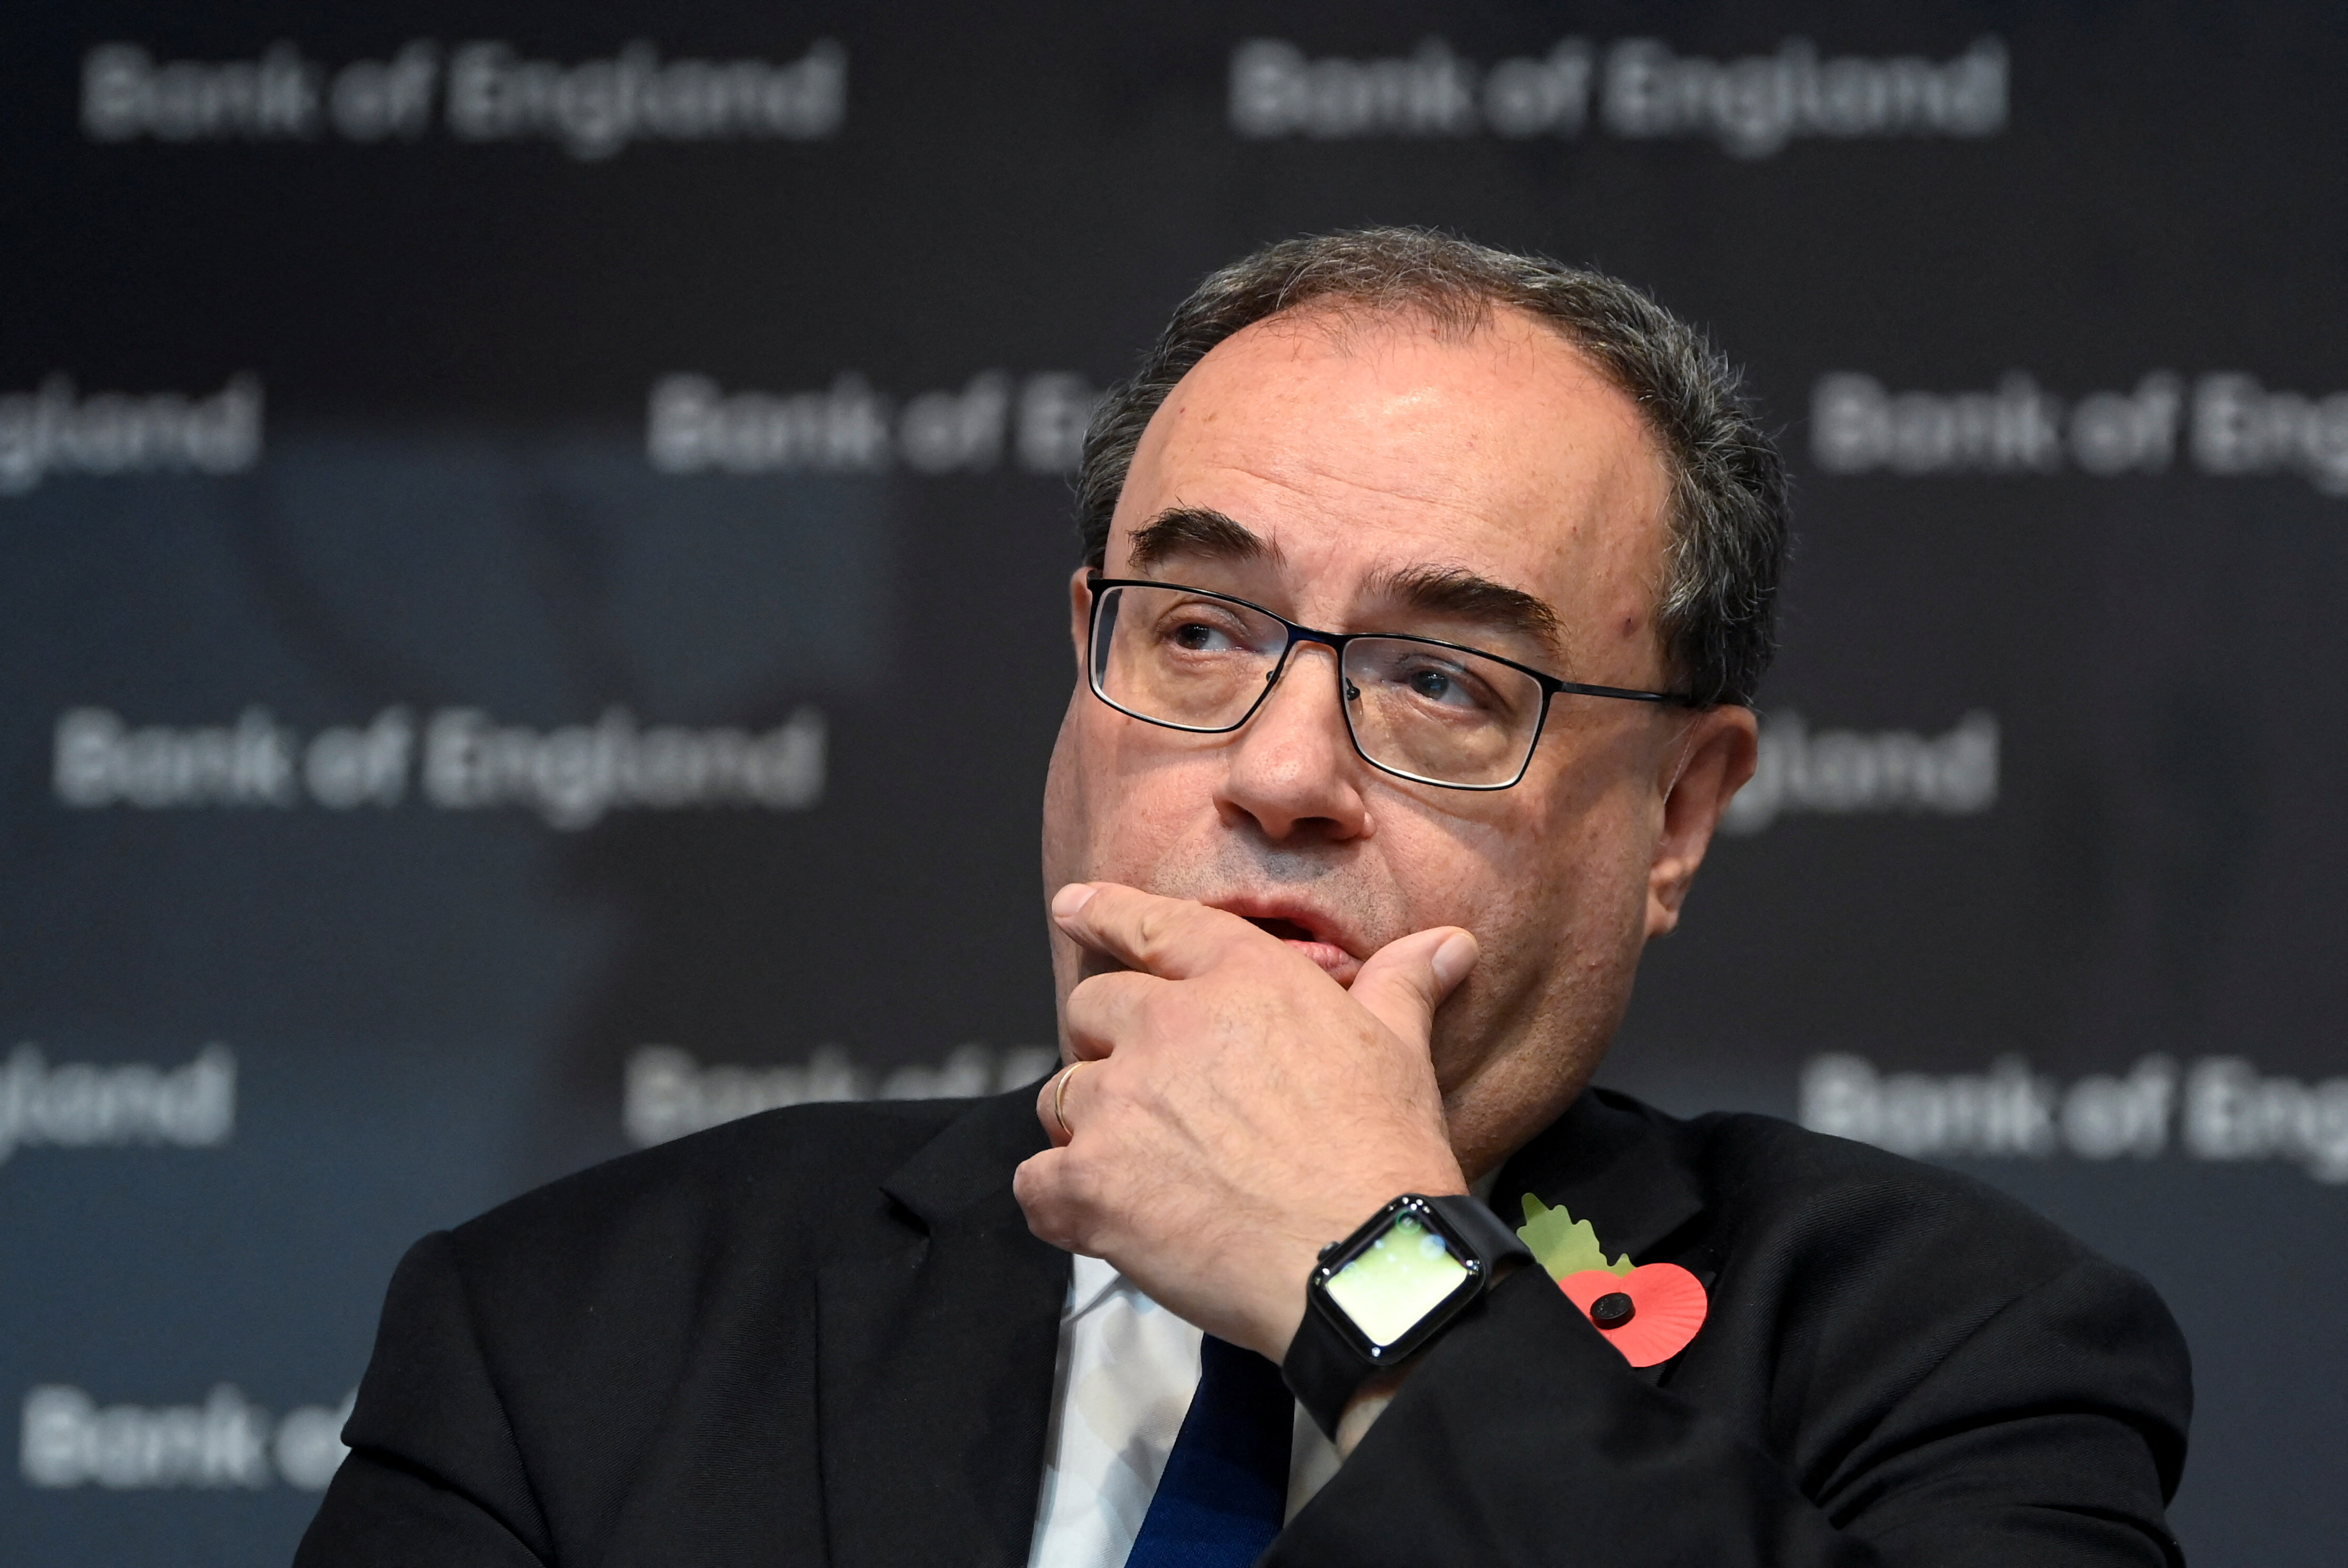 Bank of England Monetary Policy Report News Conference, in London